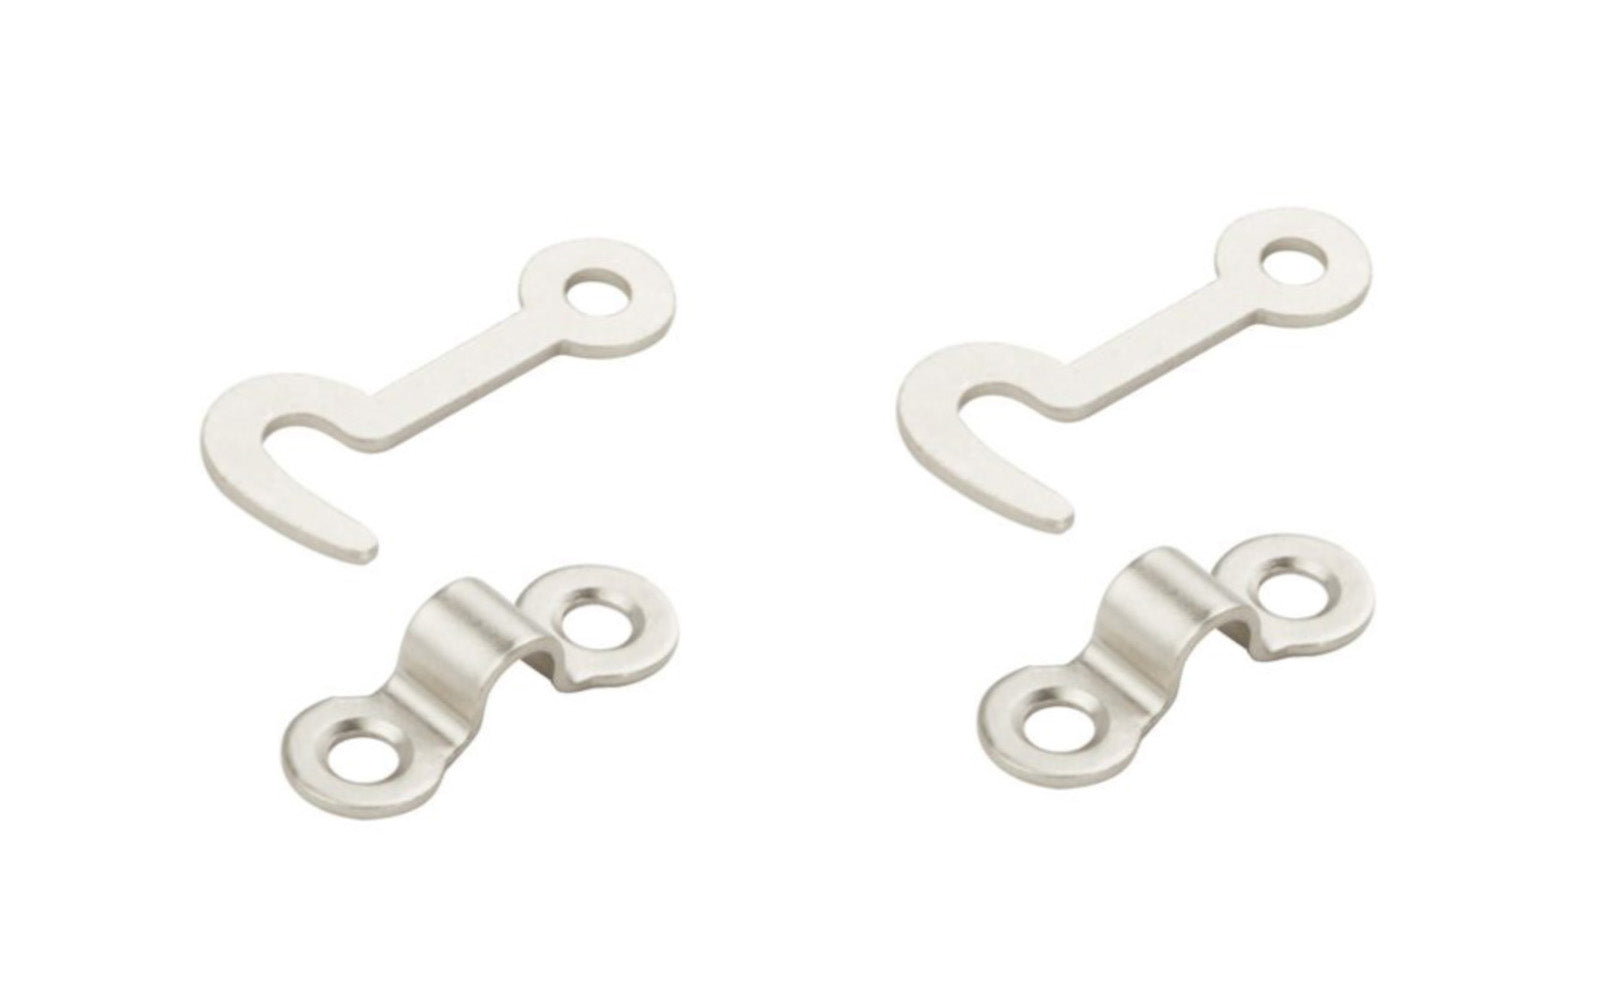 Small Hooks & Staples - 2 Pack. These small small hooks & staples are designed for small chests, jewelry boxes, craft projects, etc. Hook & loop design can be used for left or right hand applications. Sold as two hooks & staples in pack. Satin nickel.